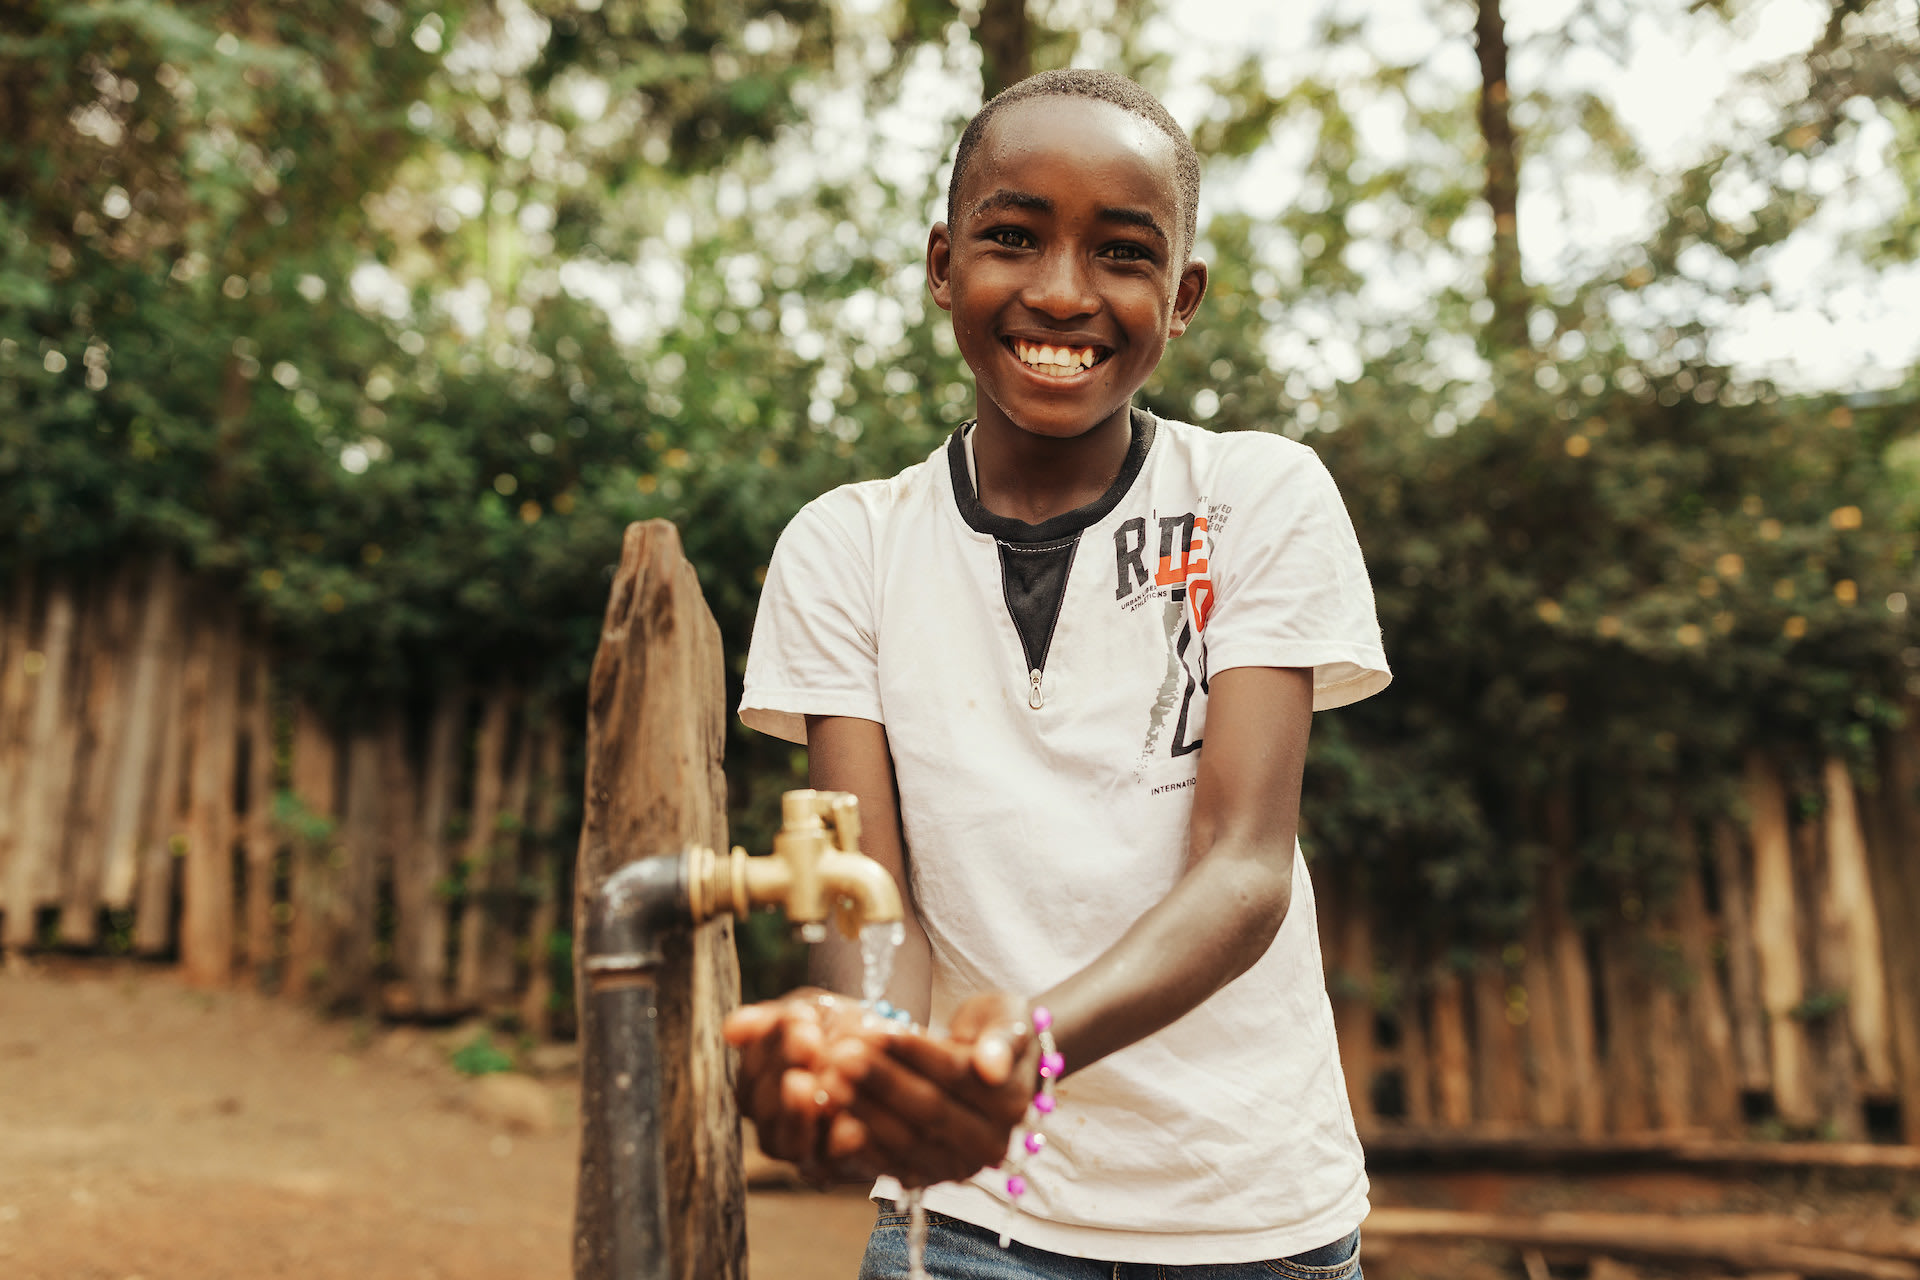 A boy getting water from an outdoor tap